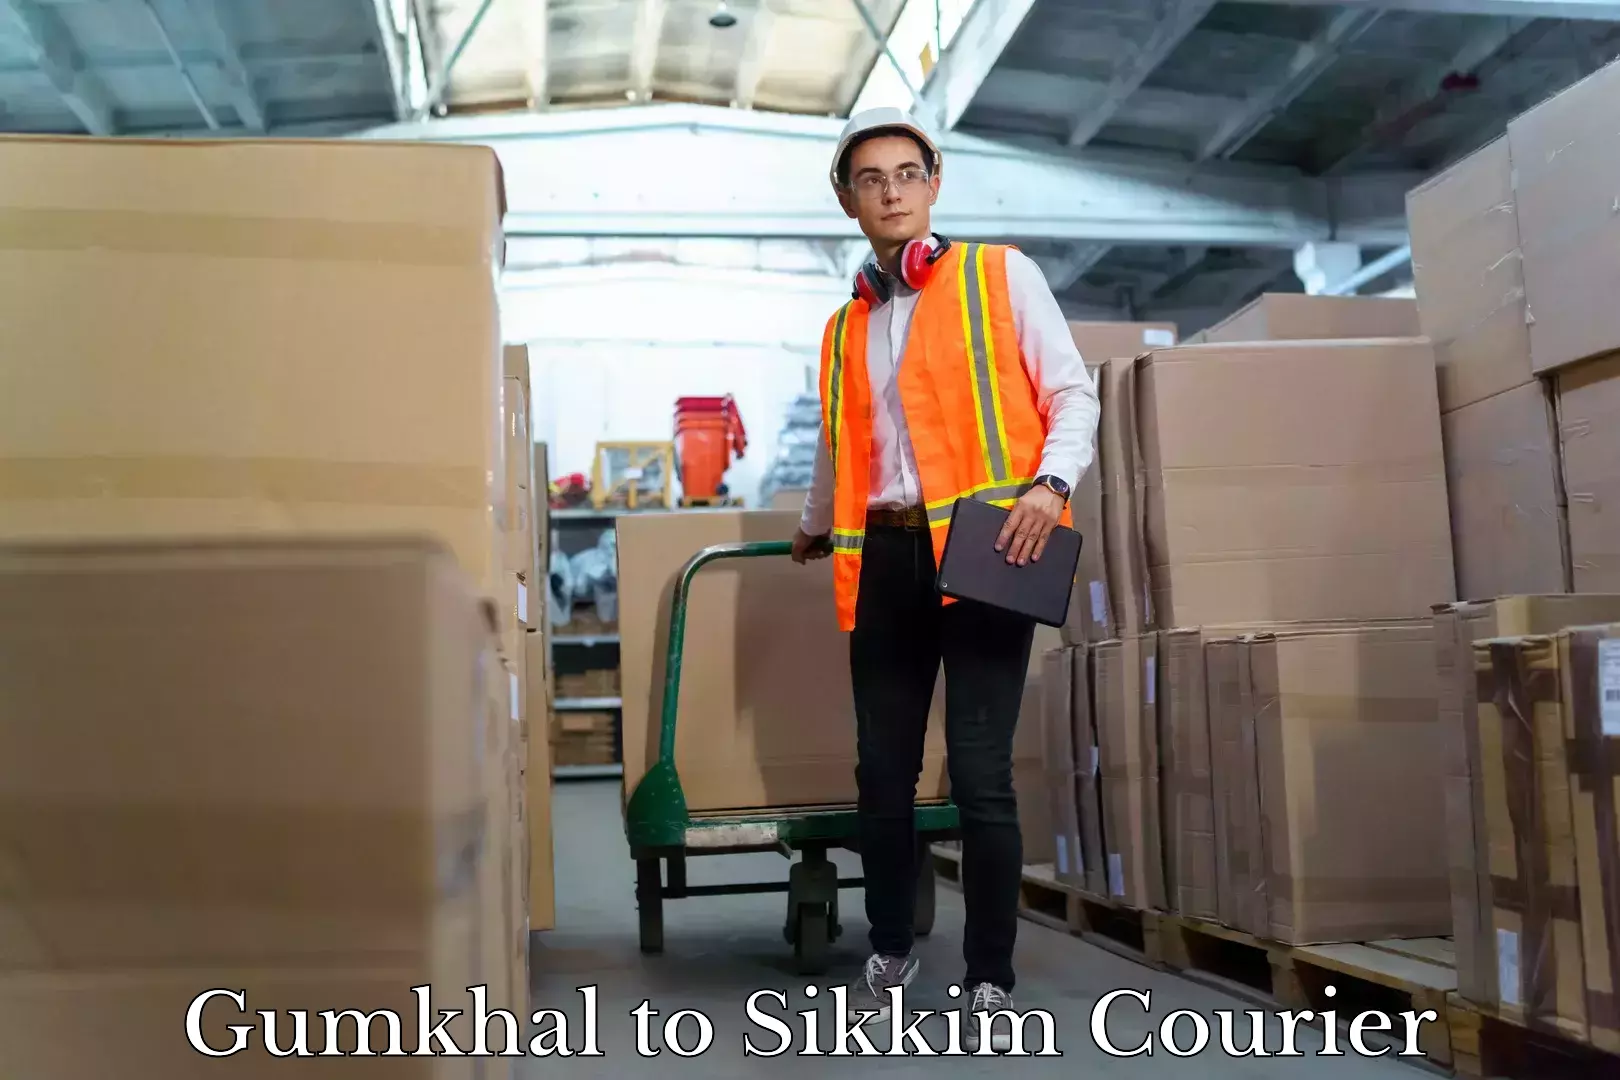 Professional moving company Gumkhal to Sikkim